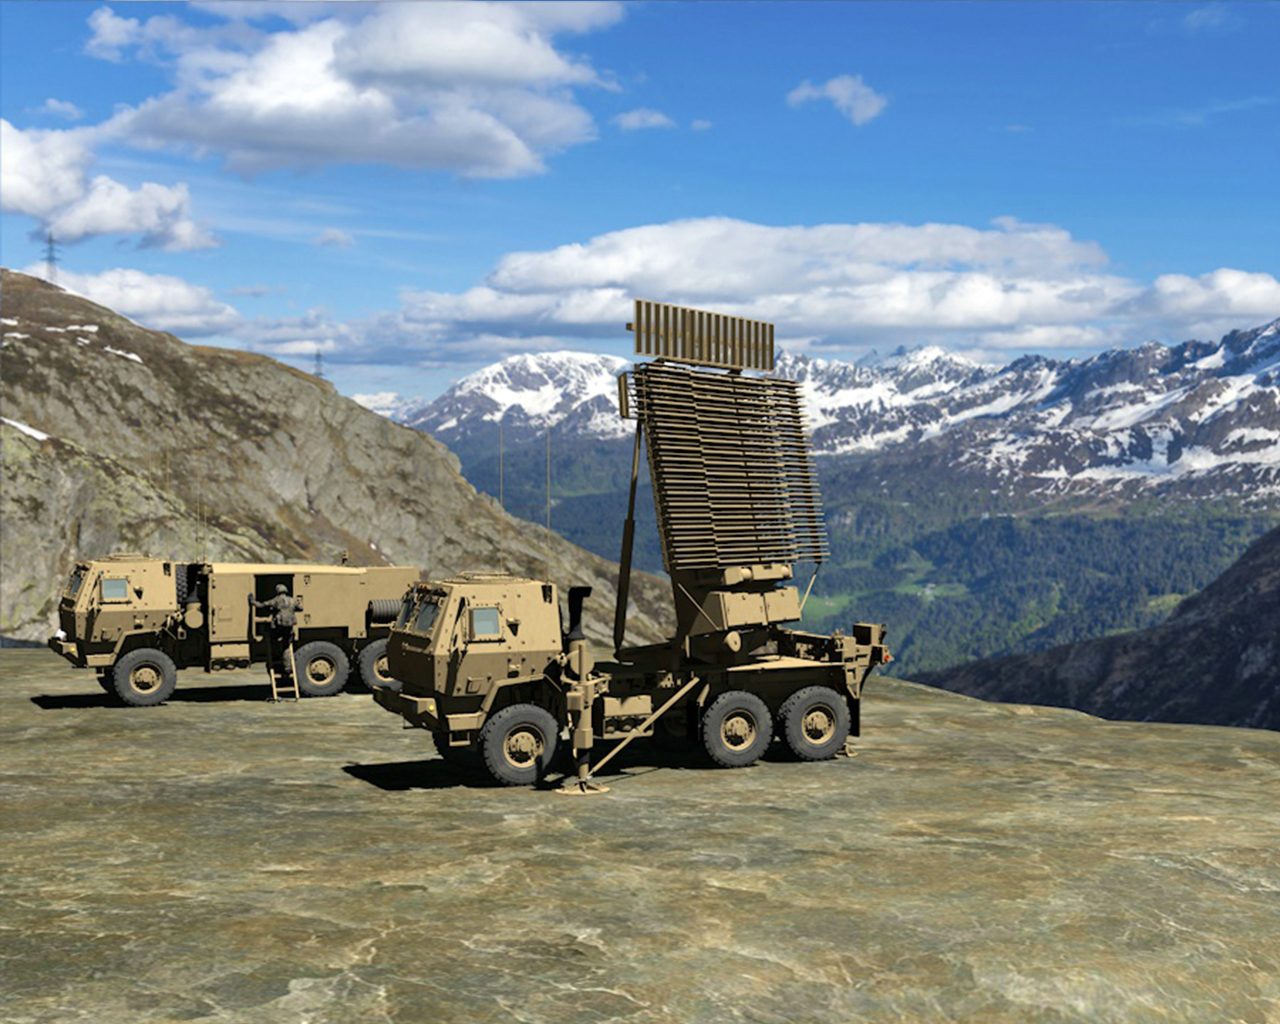 Lockheed Martin Awarded $77 Million Contract to Provide of Mobile Radars for Malaysia and Indonesia